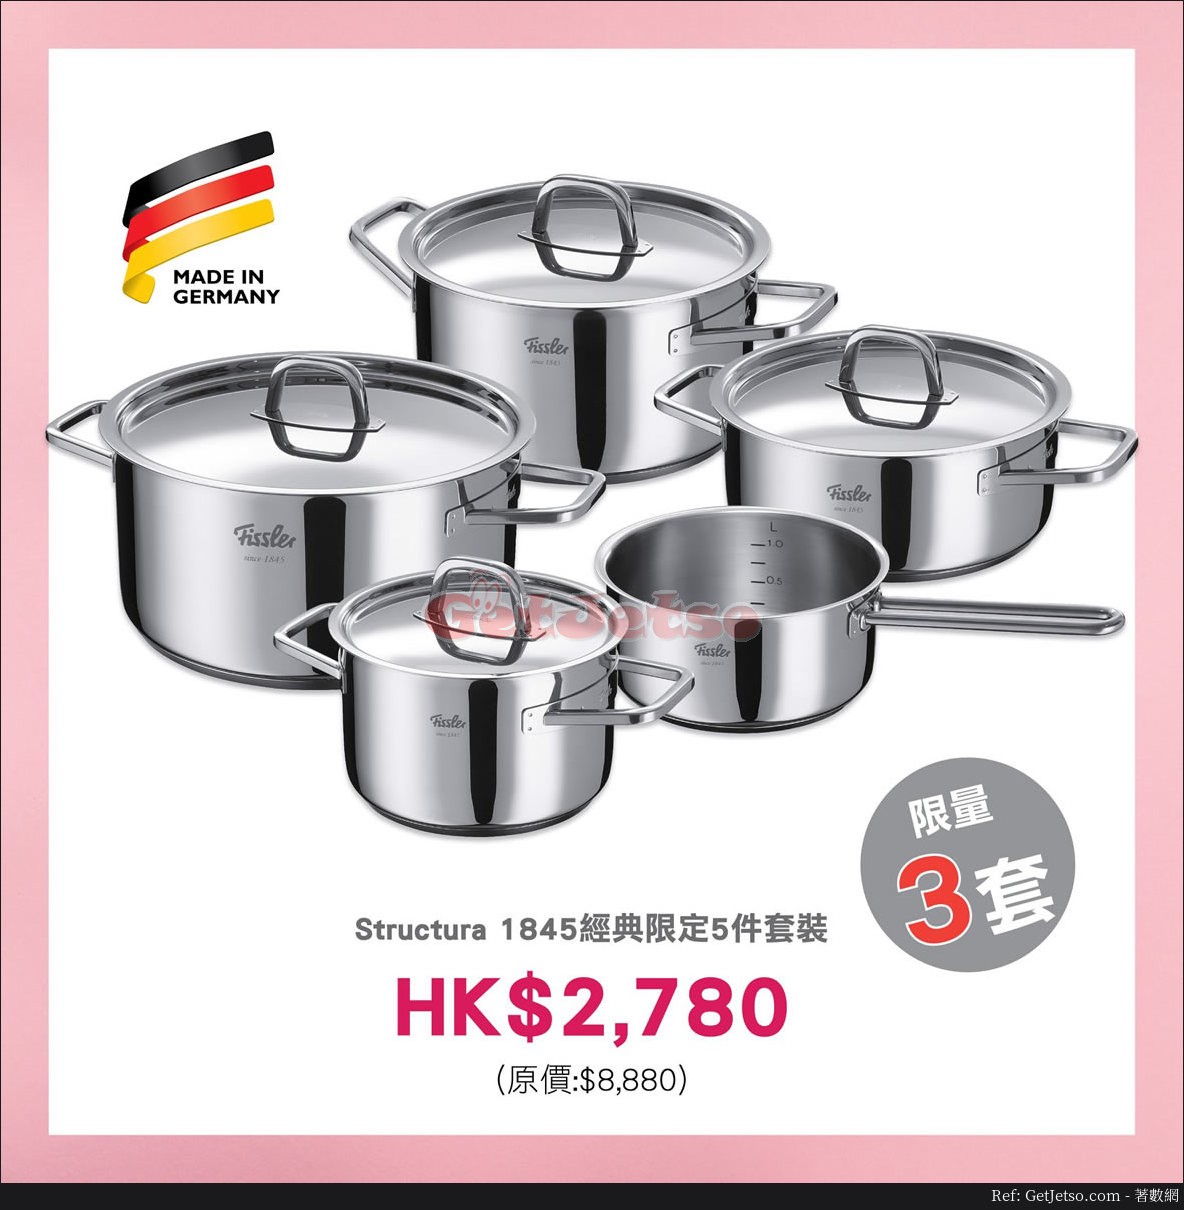 Fissler x Cook town 低至3折Private sale 優惠(18年2月1-3日)圖片3